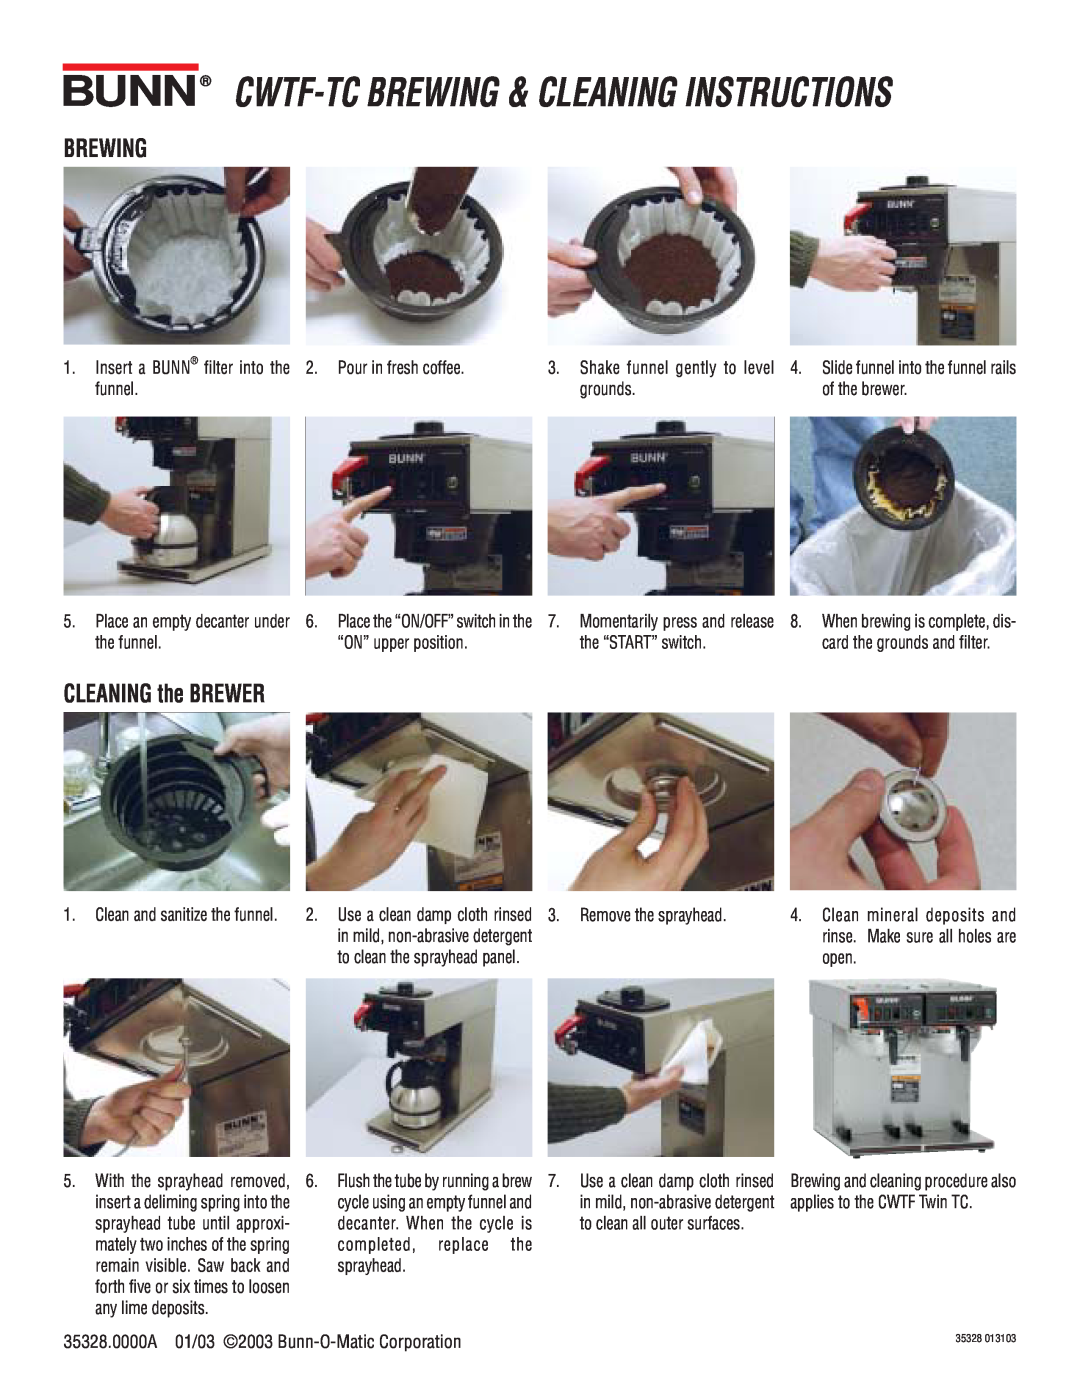 Bunn CWTF-TC manual Bunn Cwtf-Tcbrewing & Cleaning Instructions, Brewing, CLEANING the BREWER 